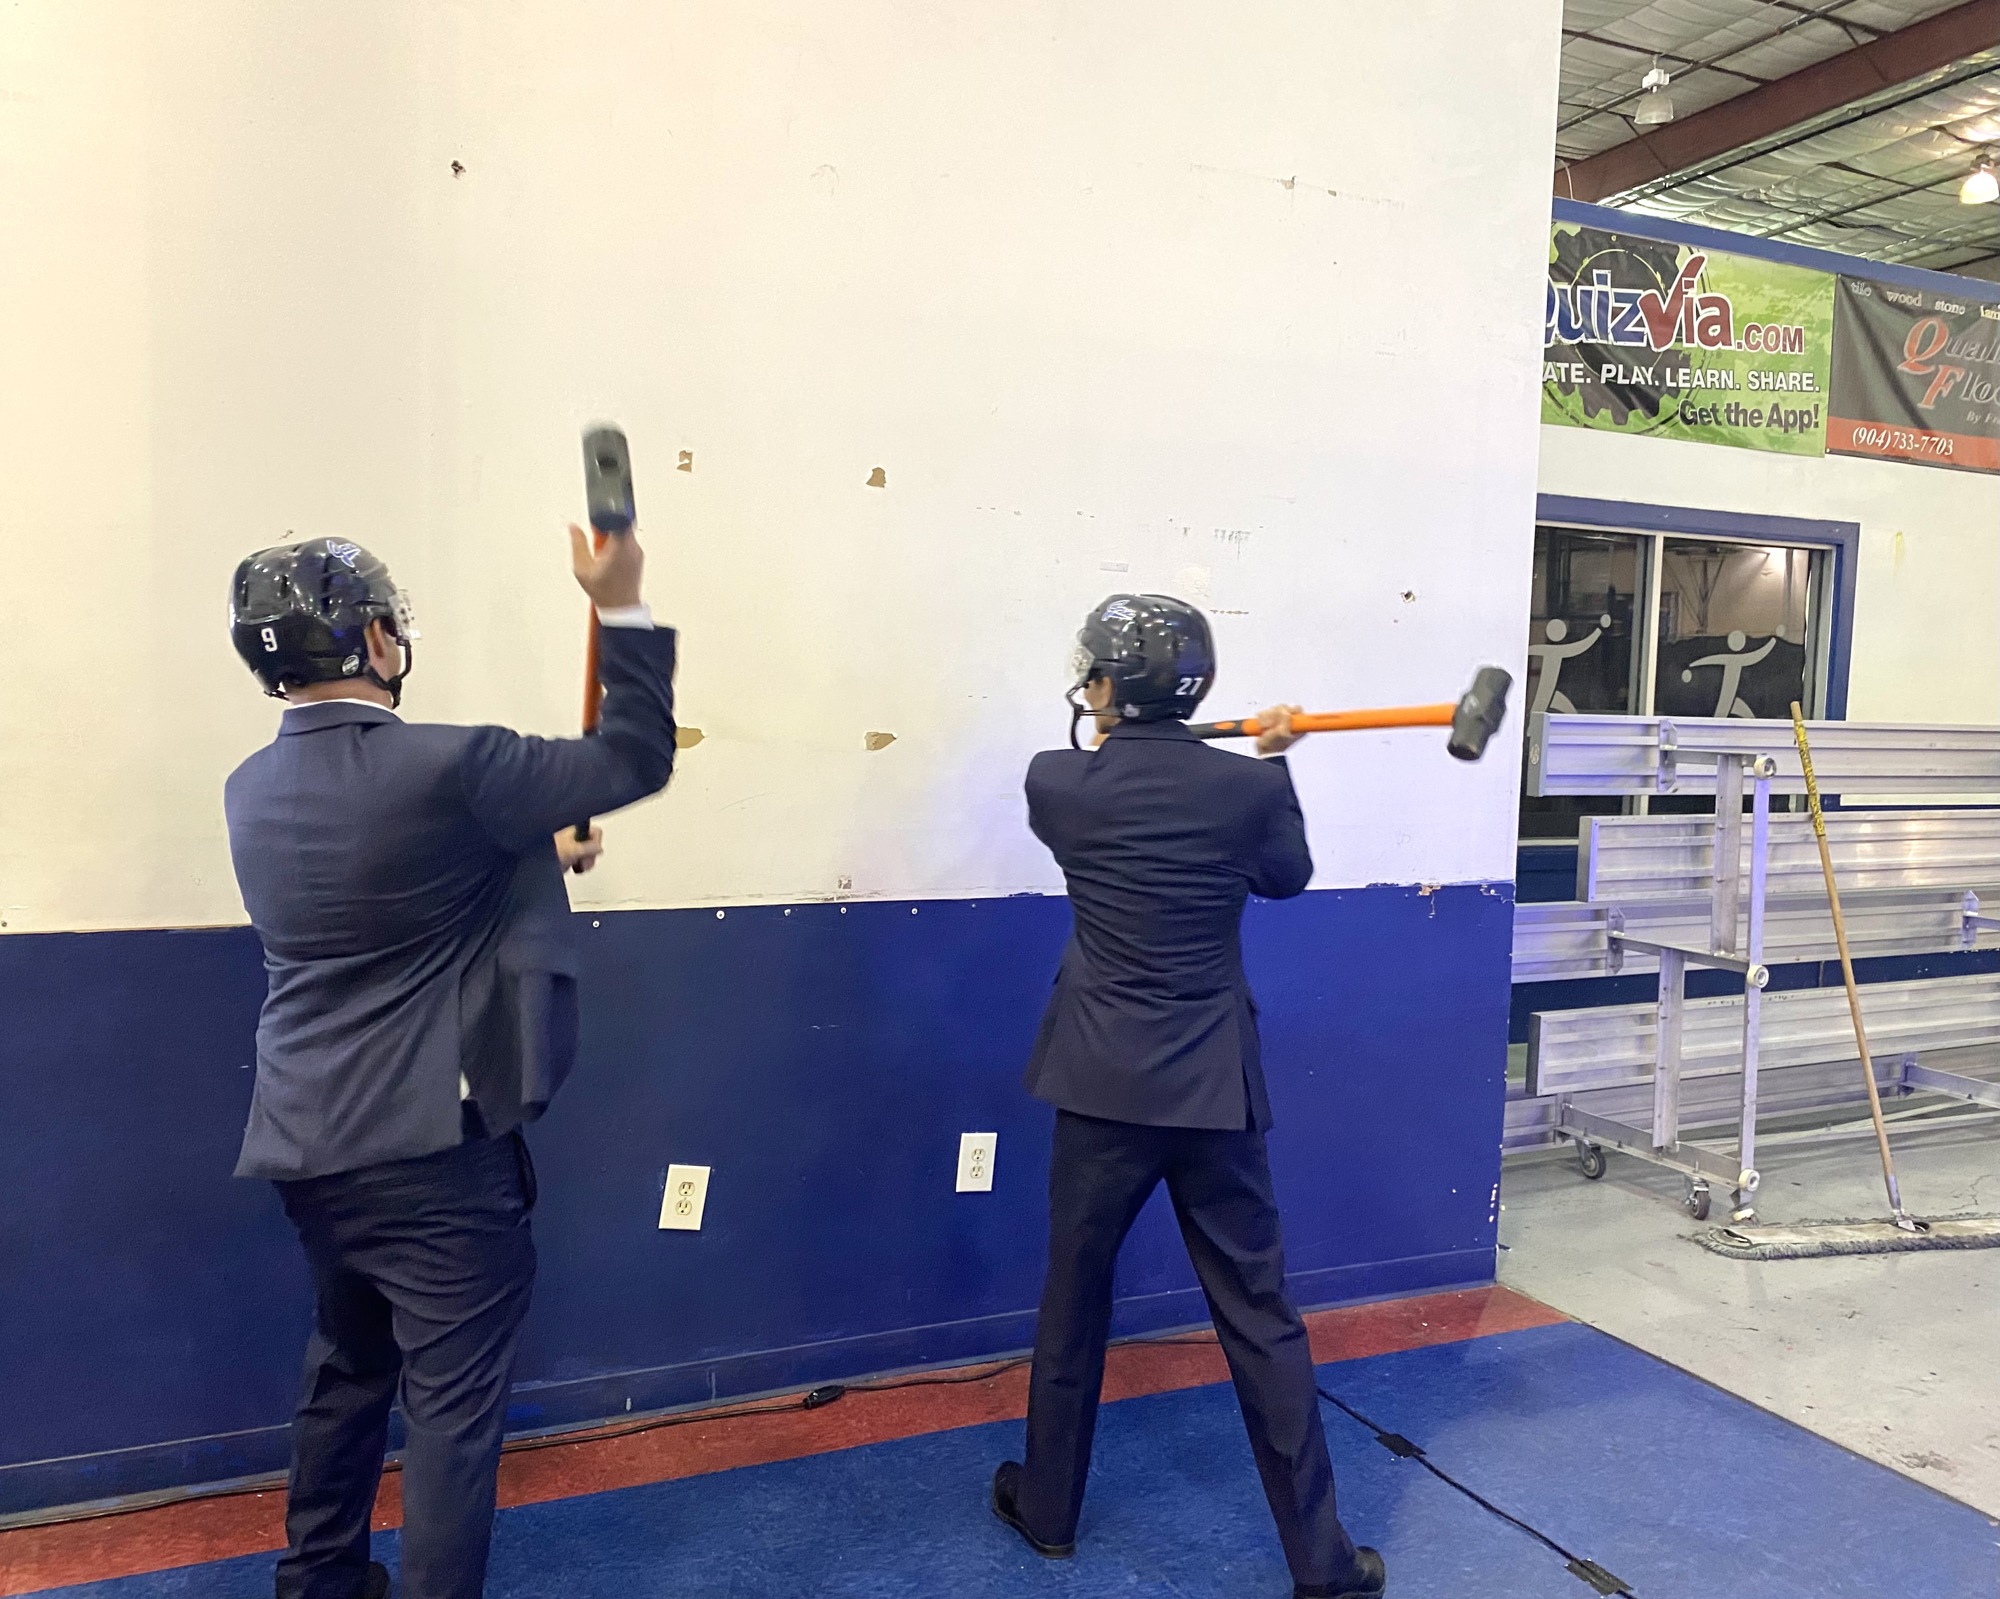 Icemen majority owner Andy Kaufmann and Community First President and CEO John Hirabayashi use sledgehammers to begin demolition at the Jacksonville Ice & Sportsplex.